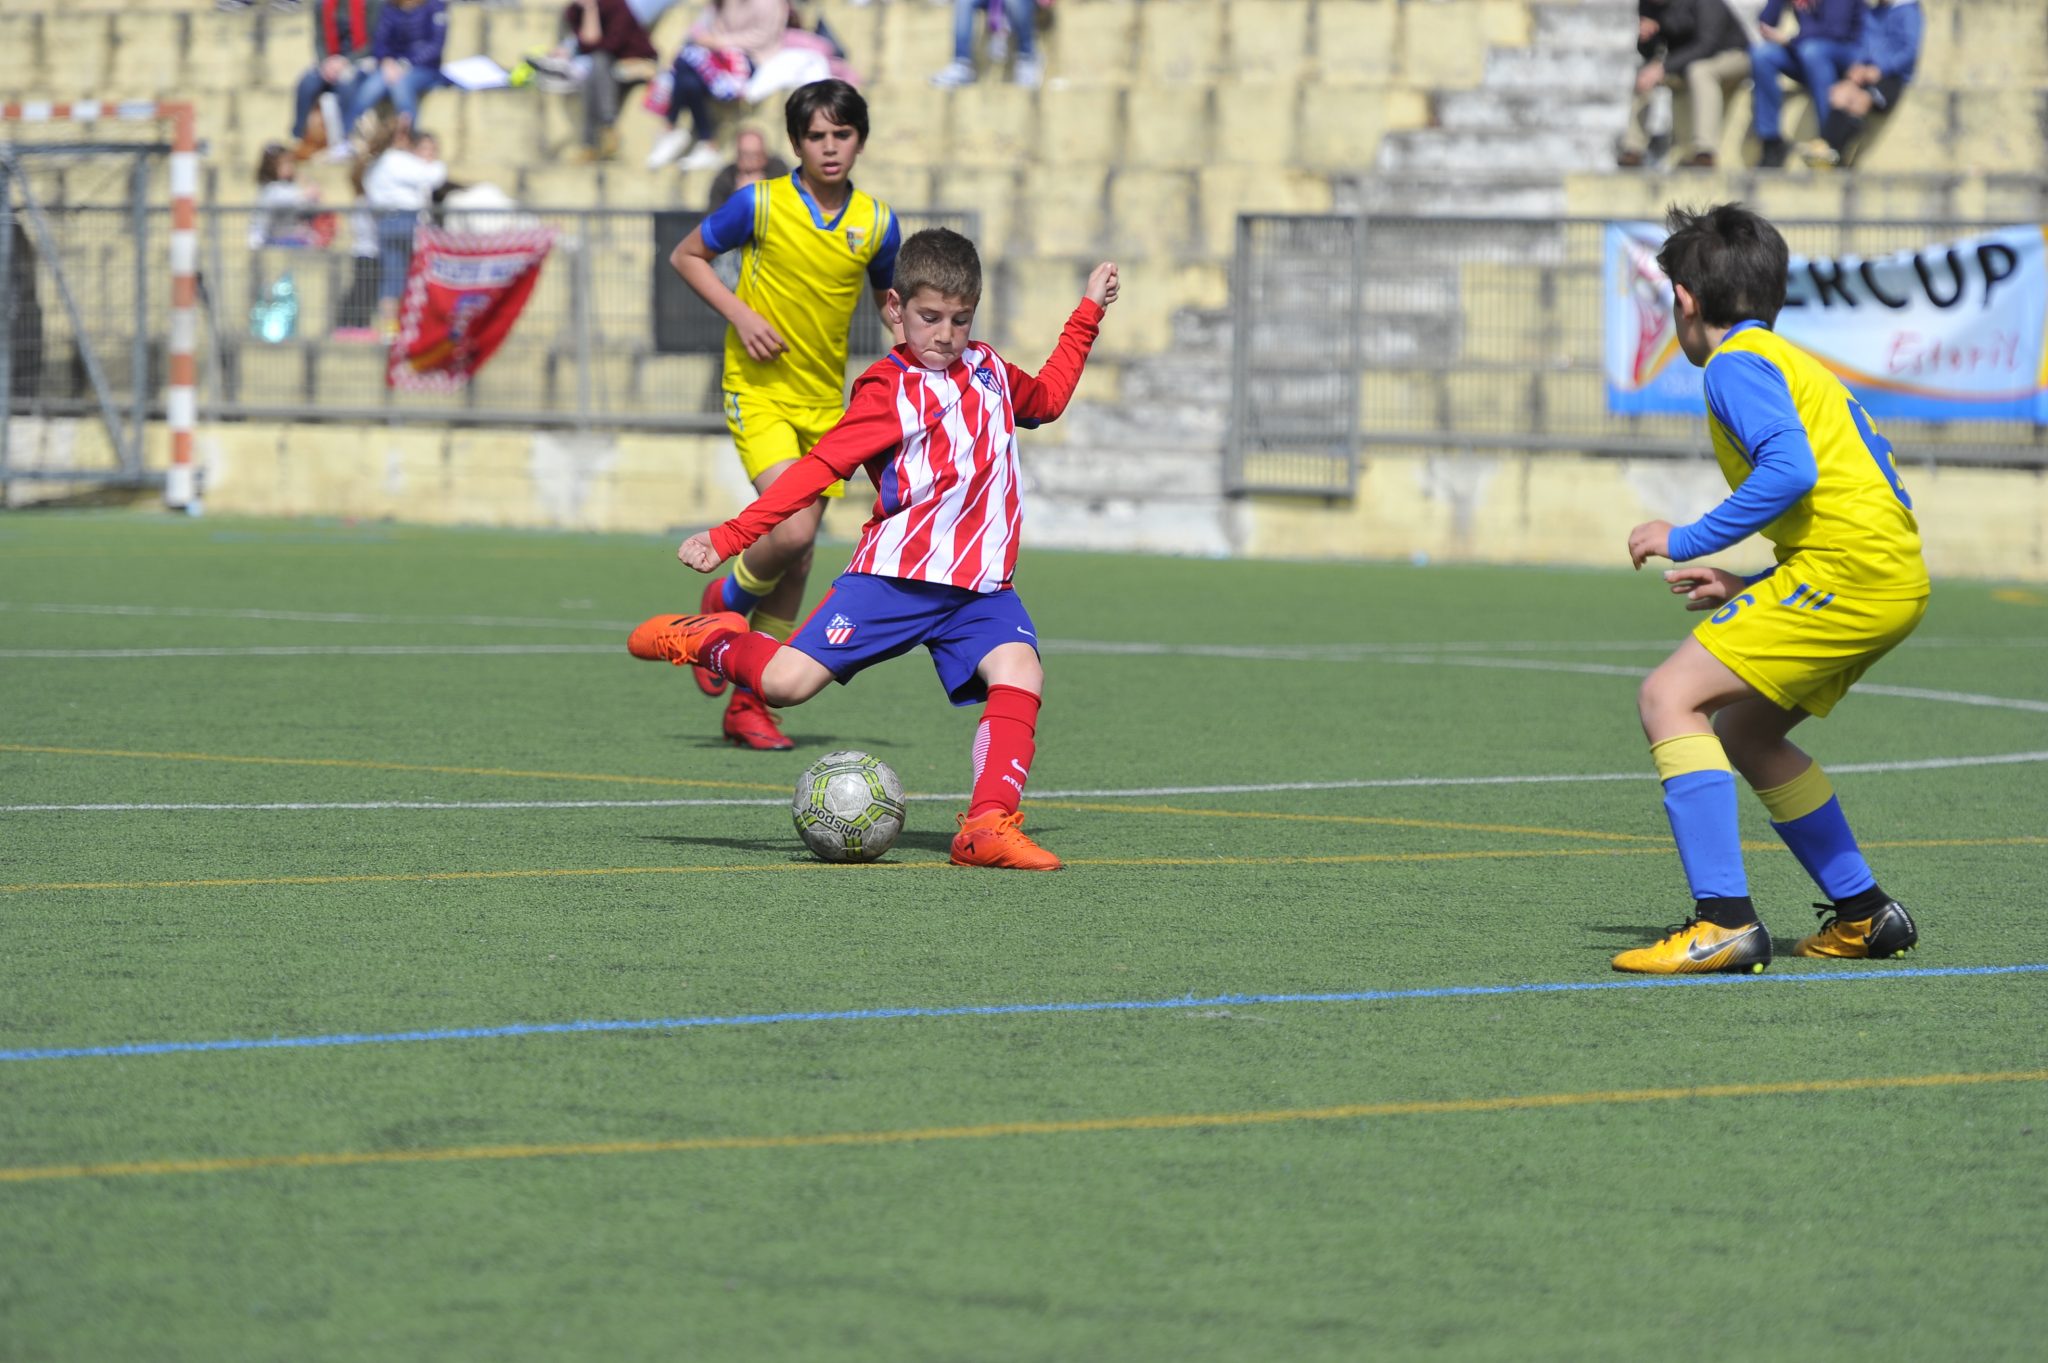 IberCup Cascais - Atletico - Road to Sport